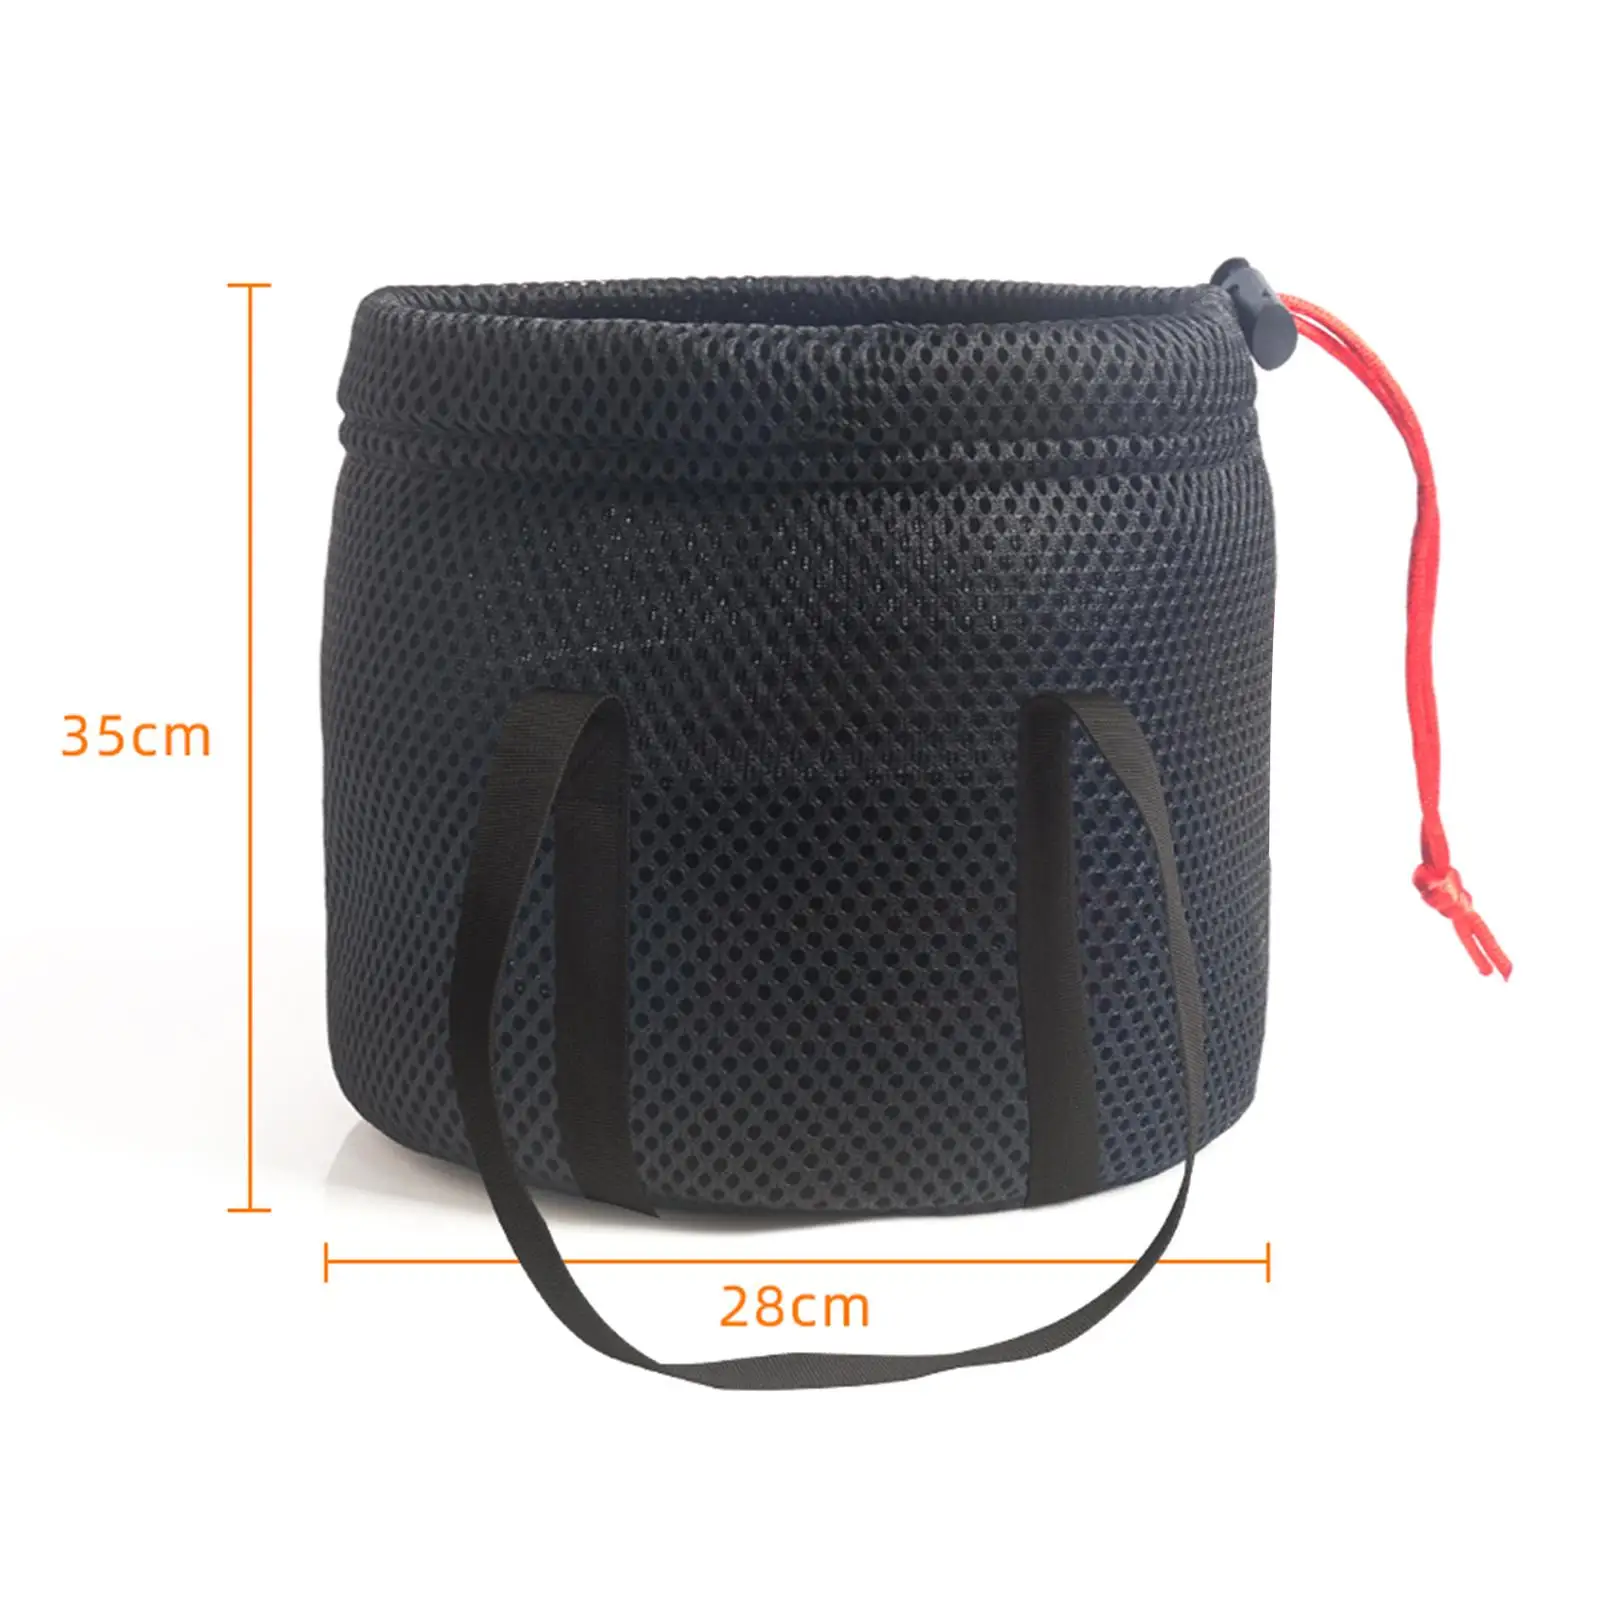 Camping Cooking Pot Bag Kitchen Cutlery Organizer Drawstring Multipurpose Utensil Carrying Bag for Camp Supplies Barbecue